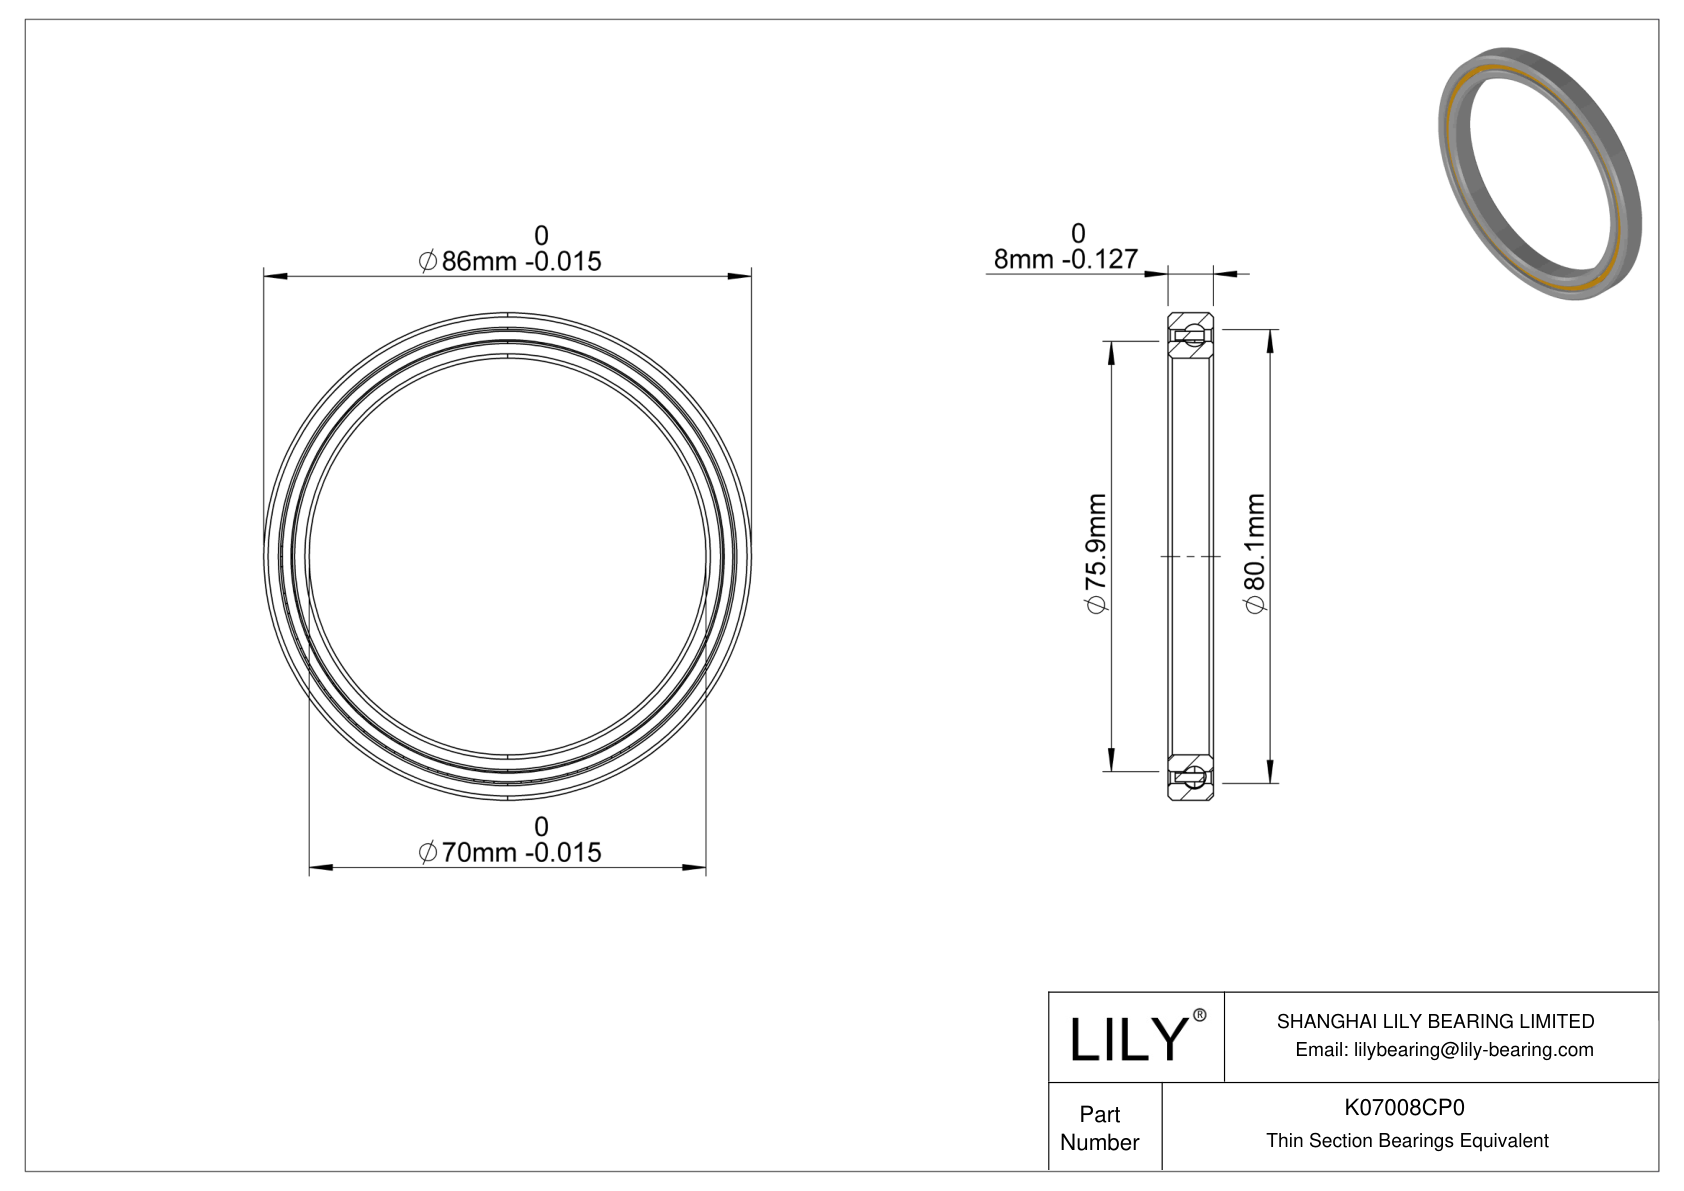 K07008CP0 Constant Section (CS) Bearings cad drawing